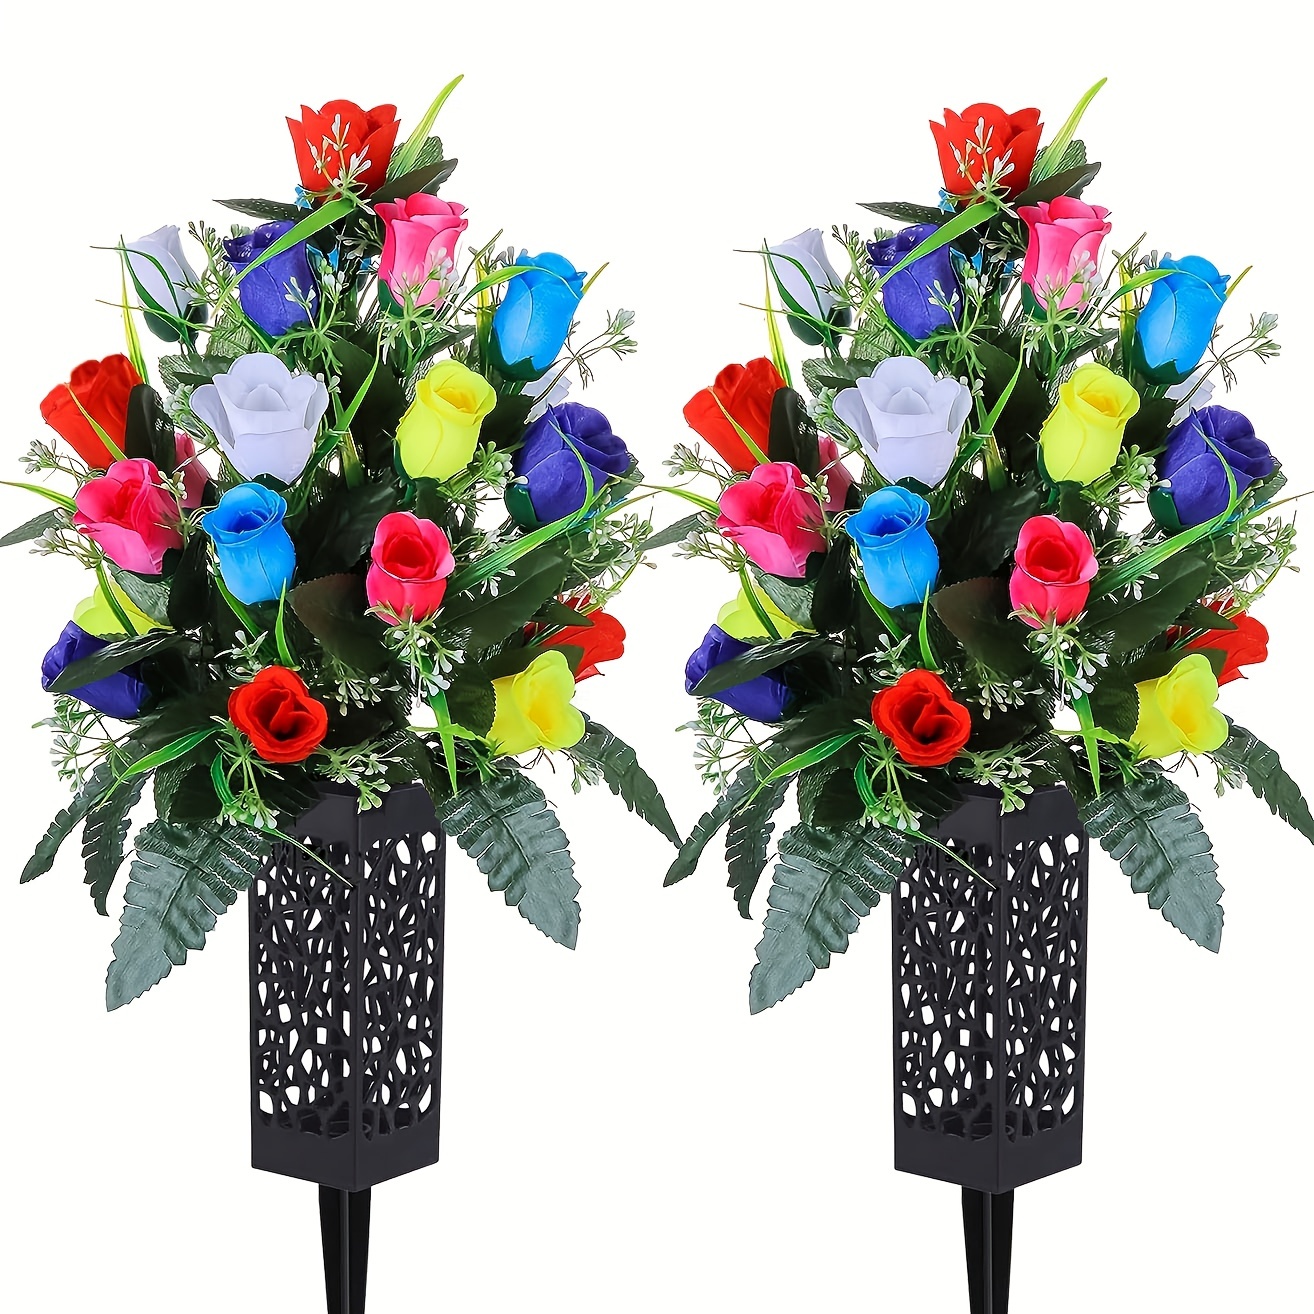 

Artificial Cemetery Flowers - Colorful Outdoor Grave Decorations Roses, Beautiful Arrangements Bouquet With Vase, Long-lasting Non-bleed Colors For Anniversary Home Decor - 1pc/set